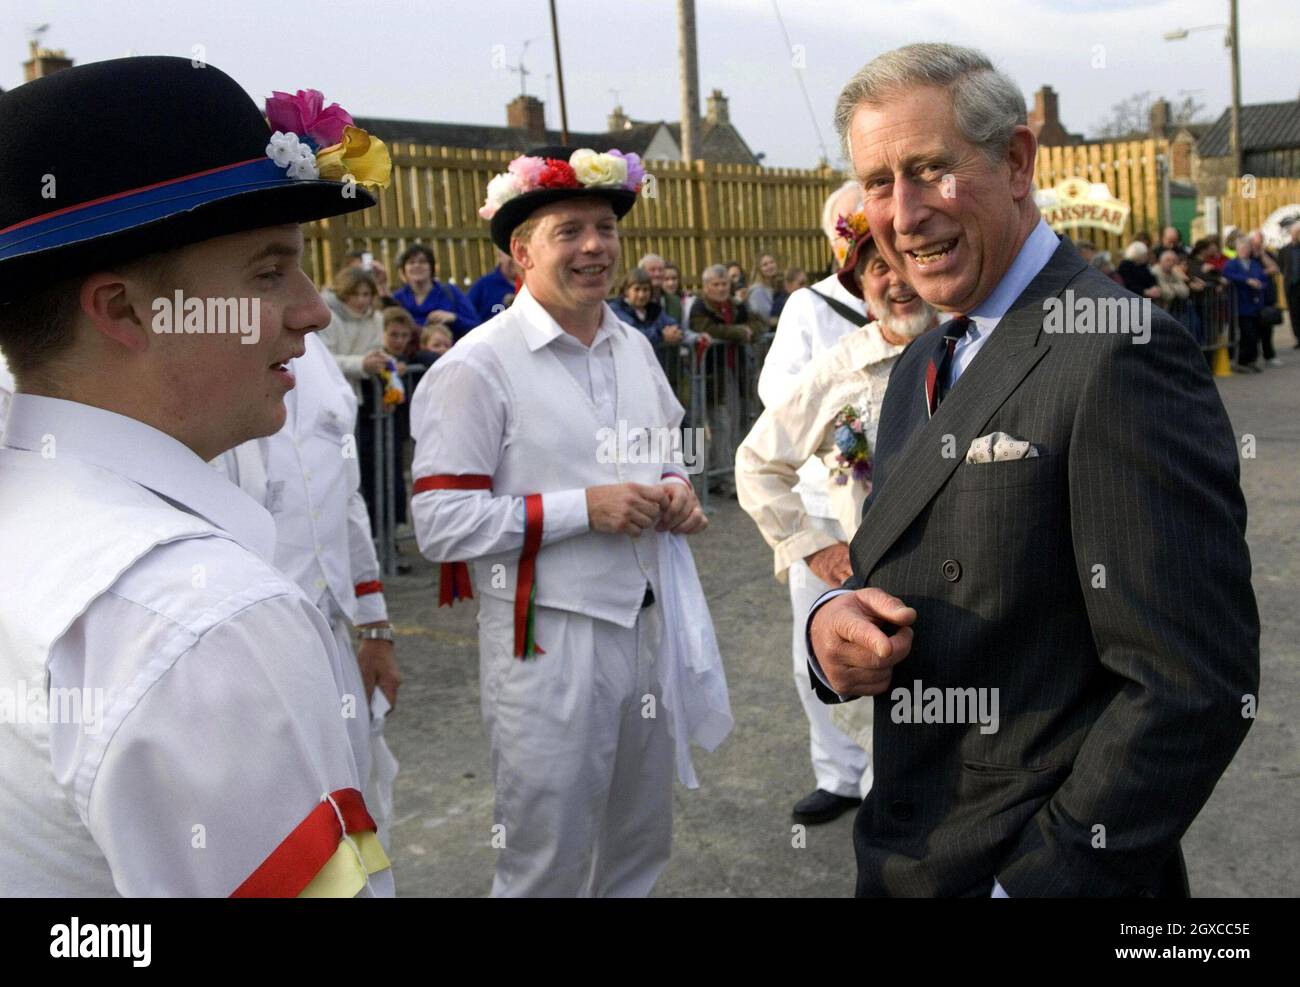 Prince Charles, Prince of Wales talks to Morris dancers during a visit to Wychwood Brewery, in Witney, Oxon, to see the brewing and fermentation processes of Duchy Ale. Stock Photo